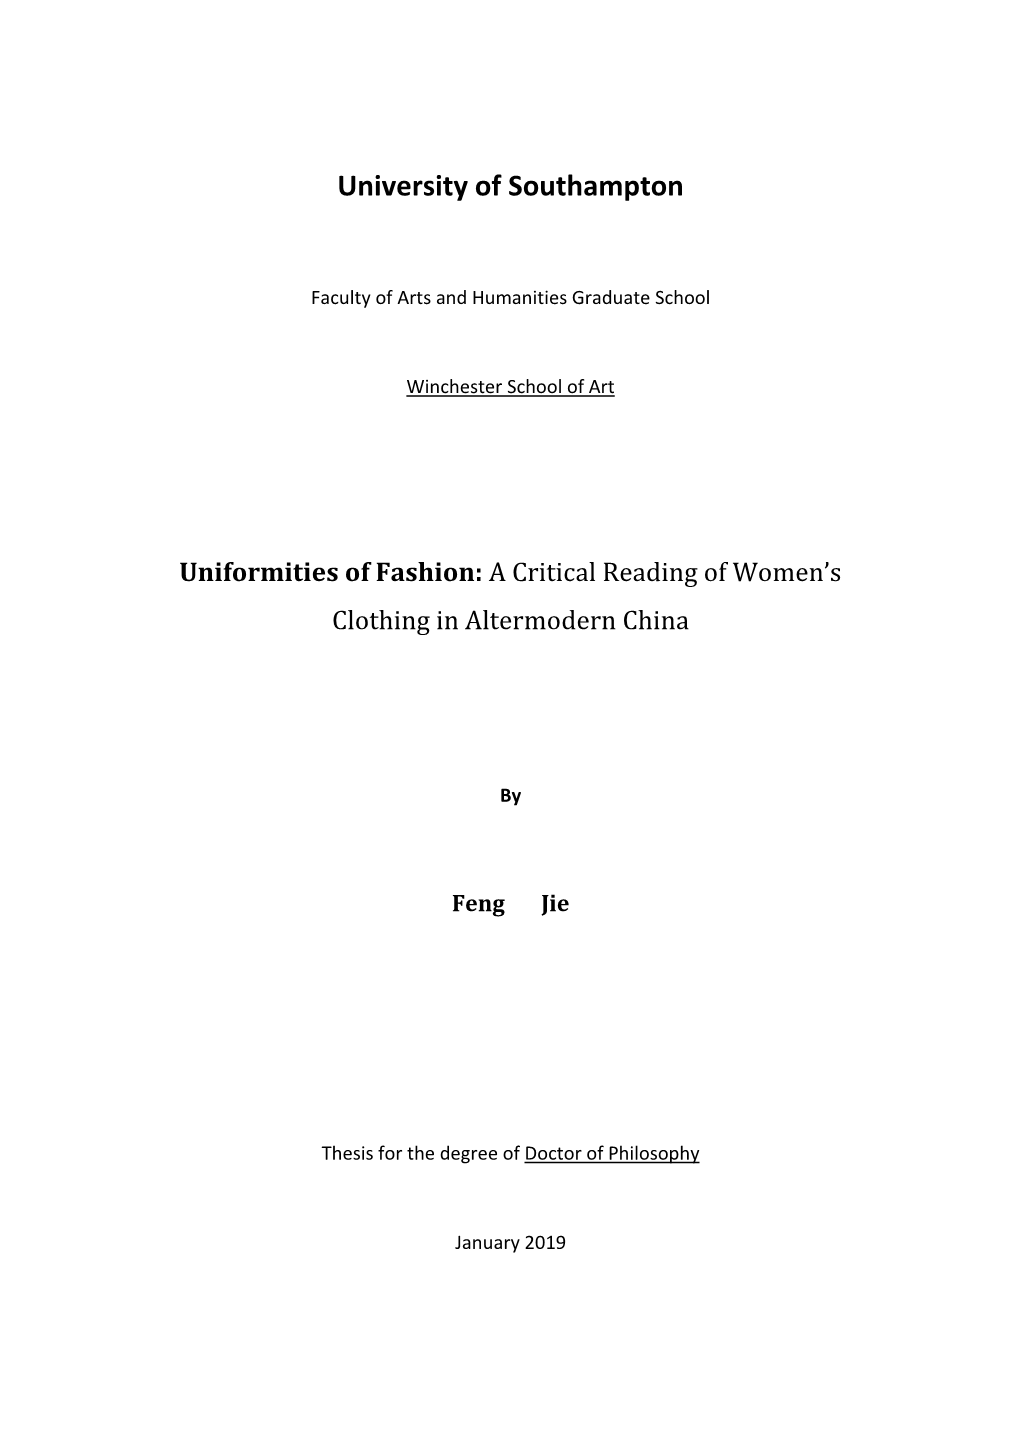 Uniformities of Fashion: a Critical Reading of Women’S Clothing in Altermodern China